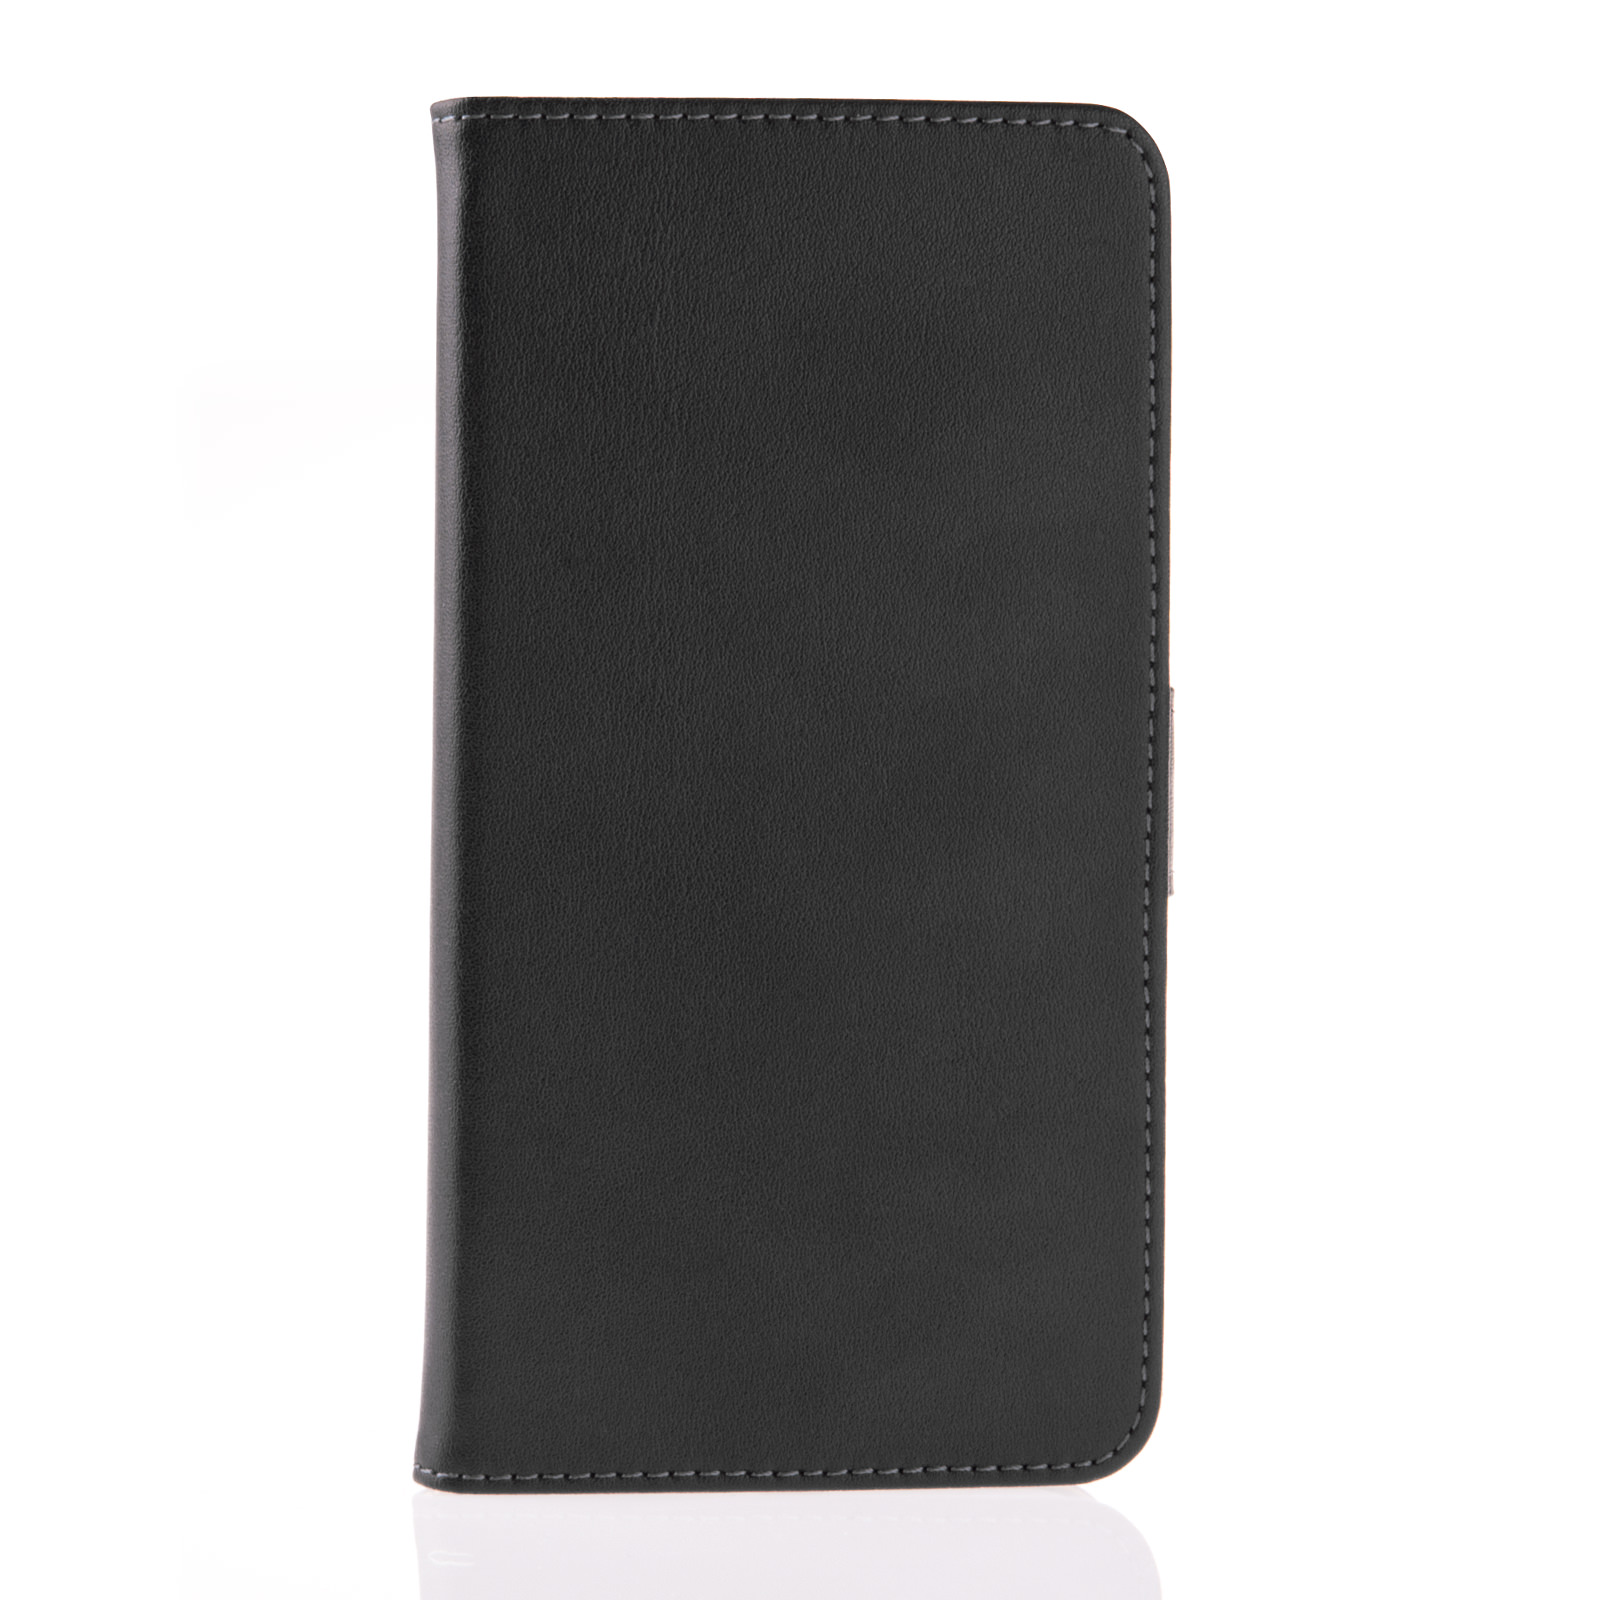 Caseflex iPhone 6 Plus and 6s Plus Real Leather Wallet Case - Black